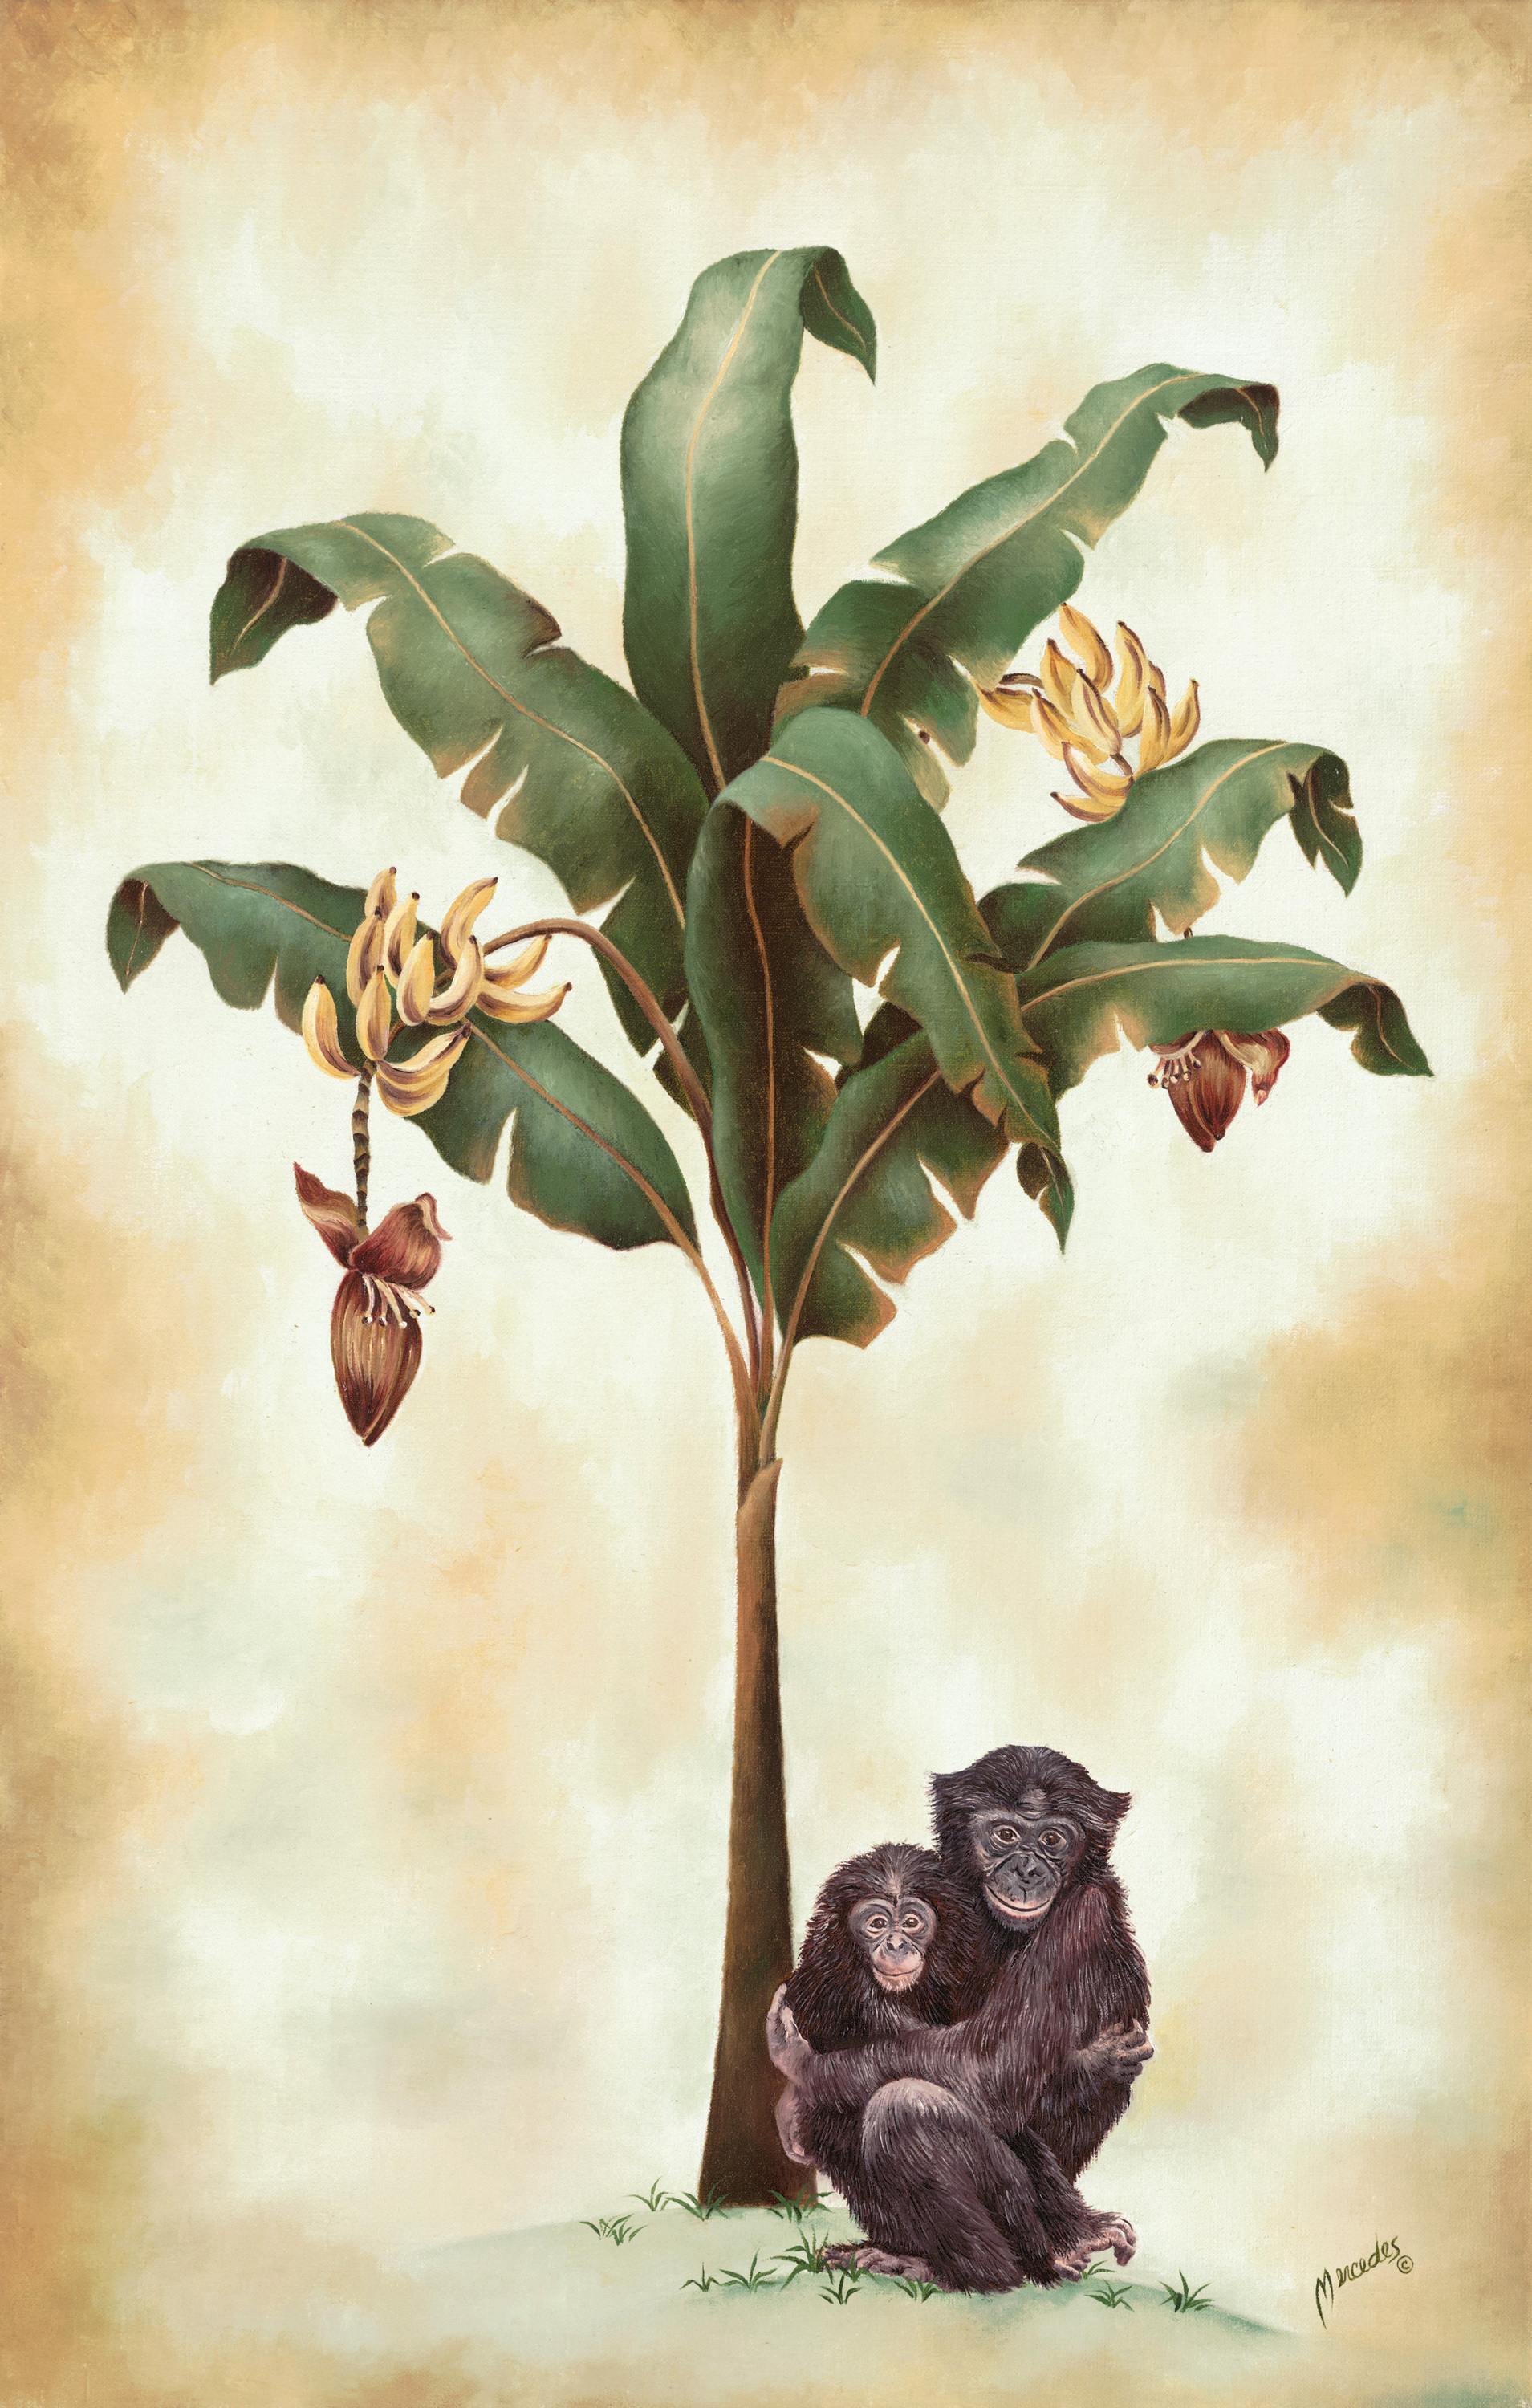 Monkeys and bananas   image only changed to rgb r5ixib